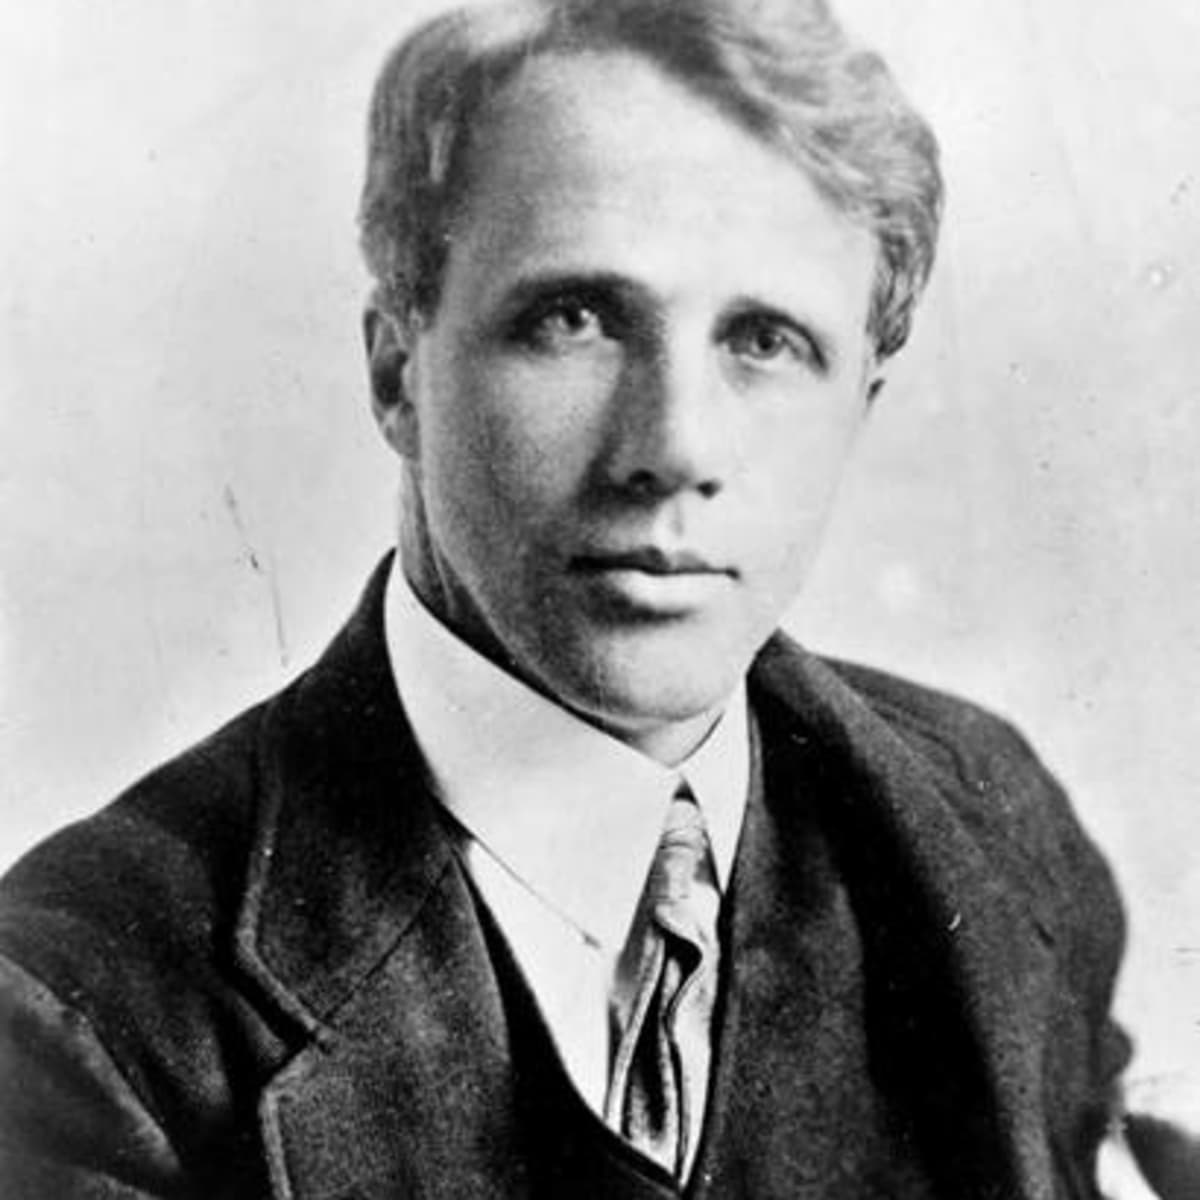 Analysis of Poem 'The Road Not Taken' by Robert Frost - Owlcation